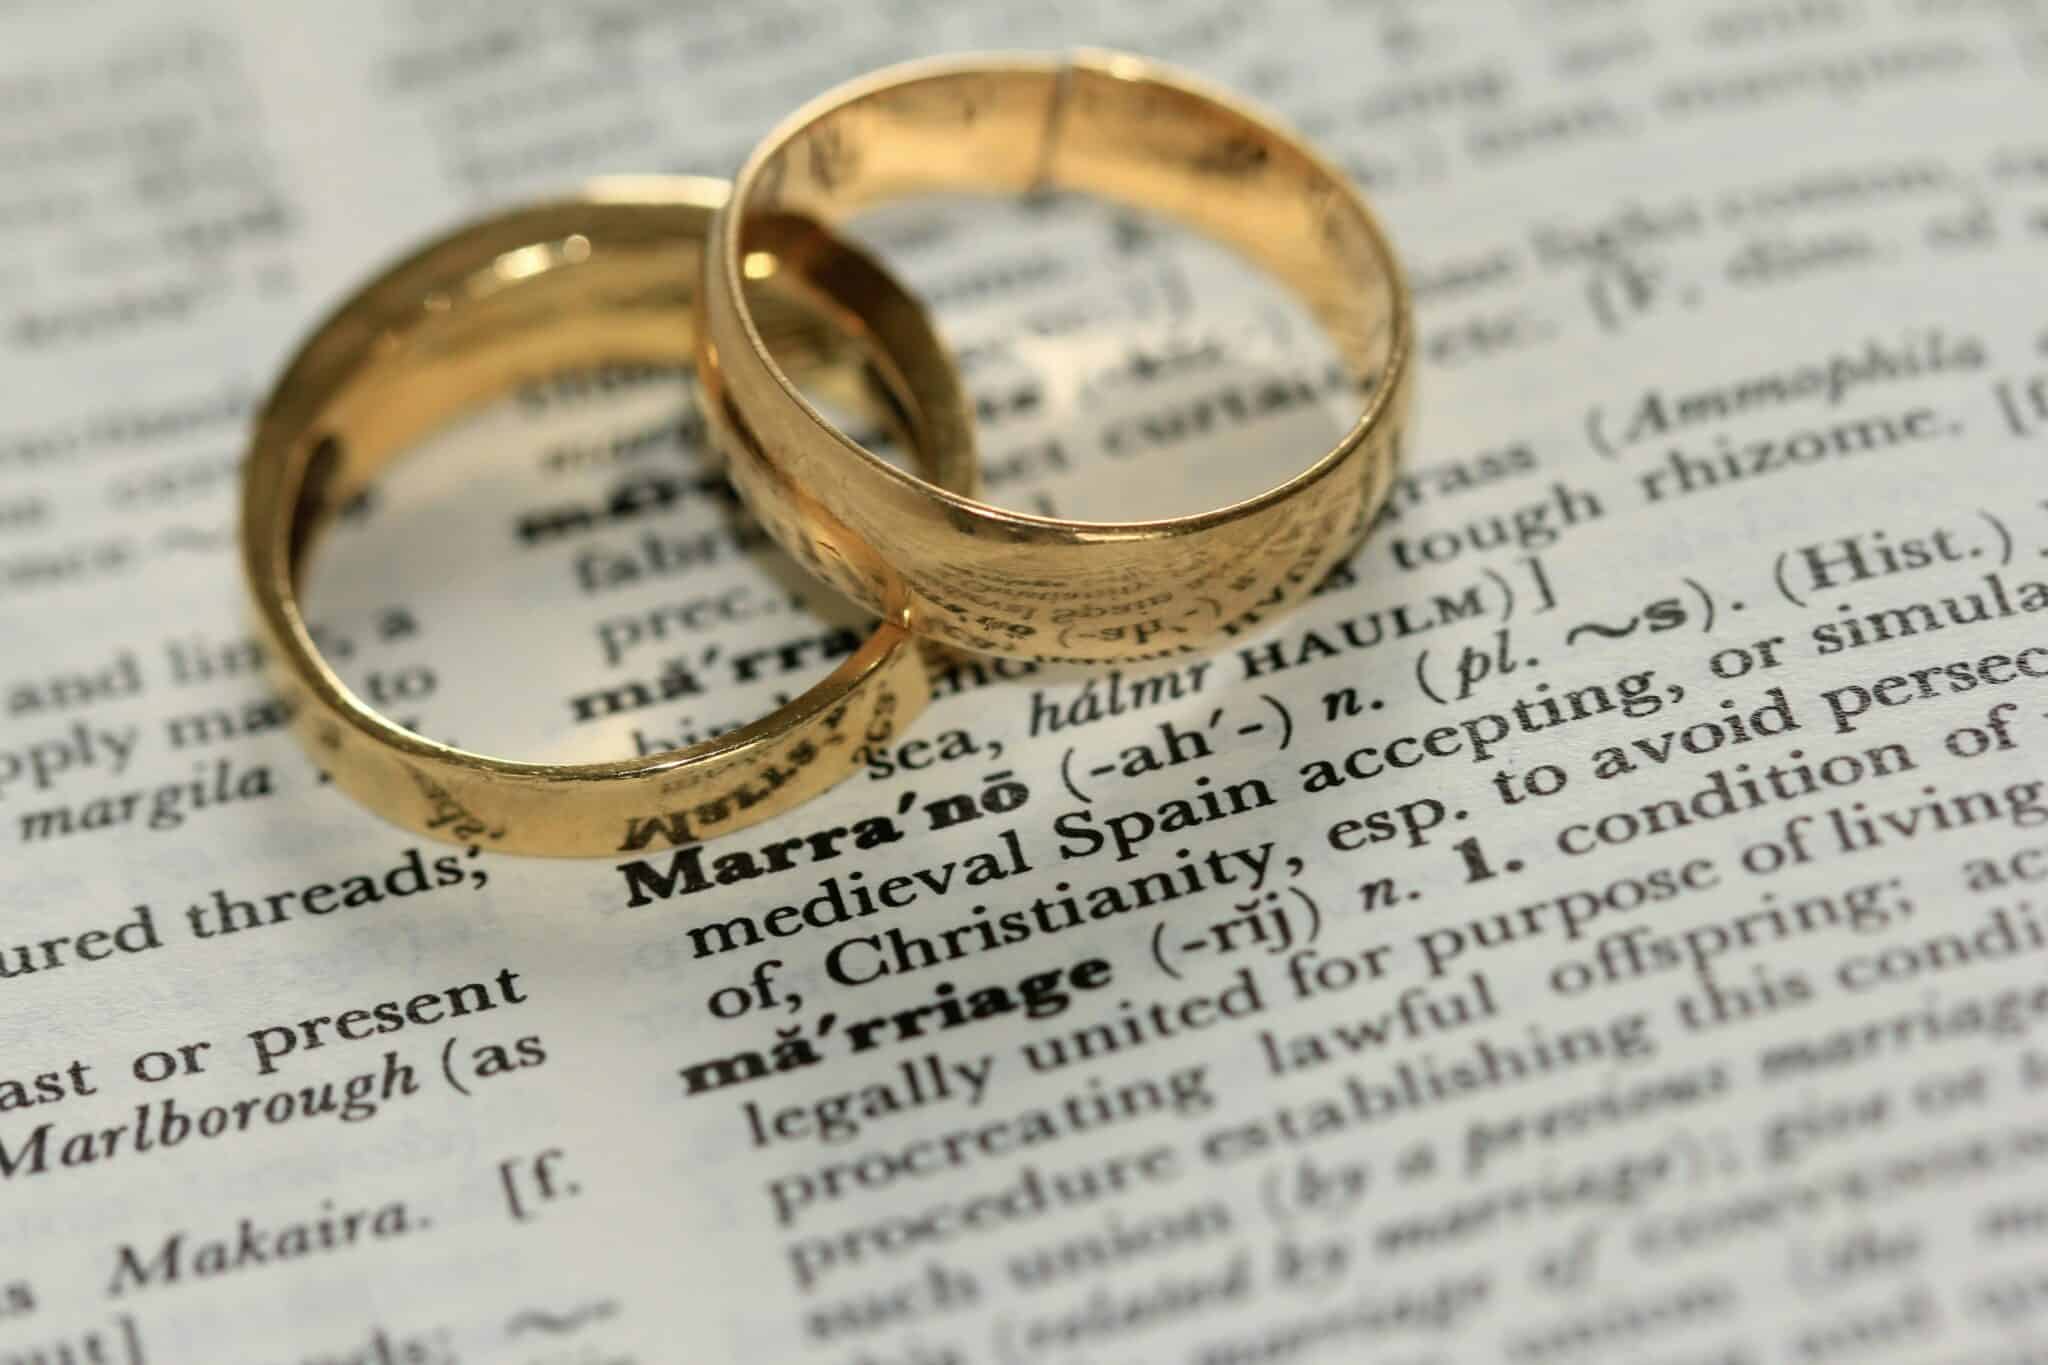 Marriage annulment - The Catholic weekly